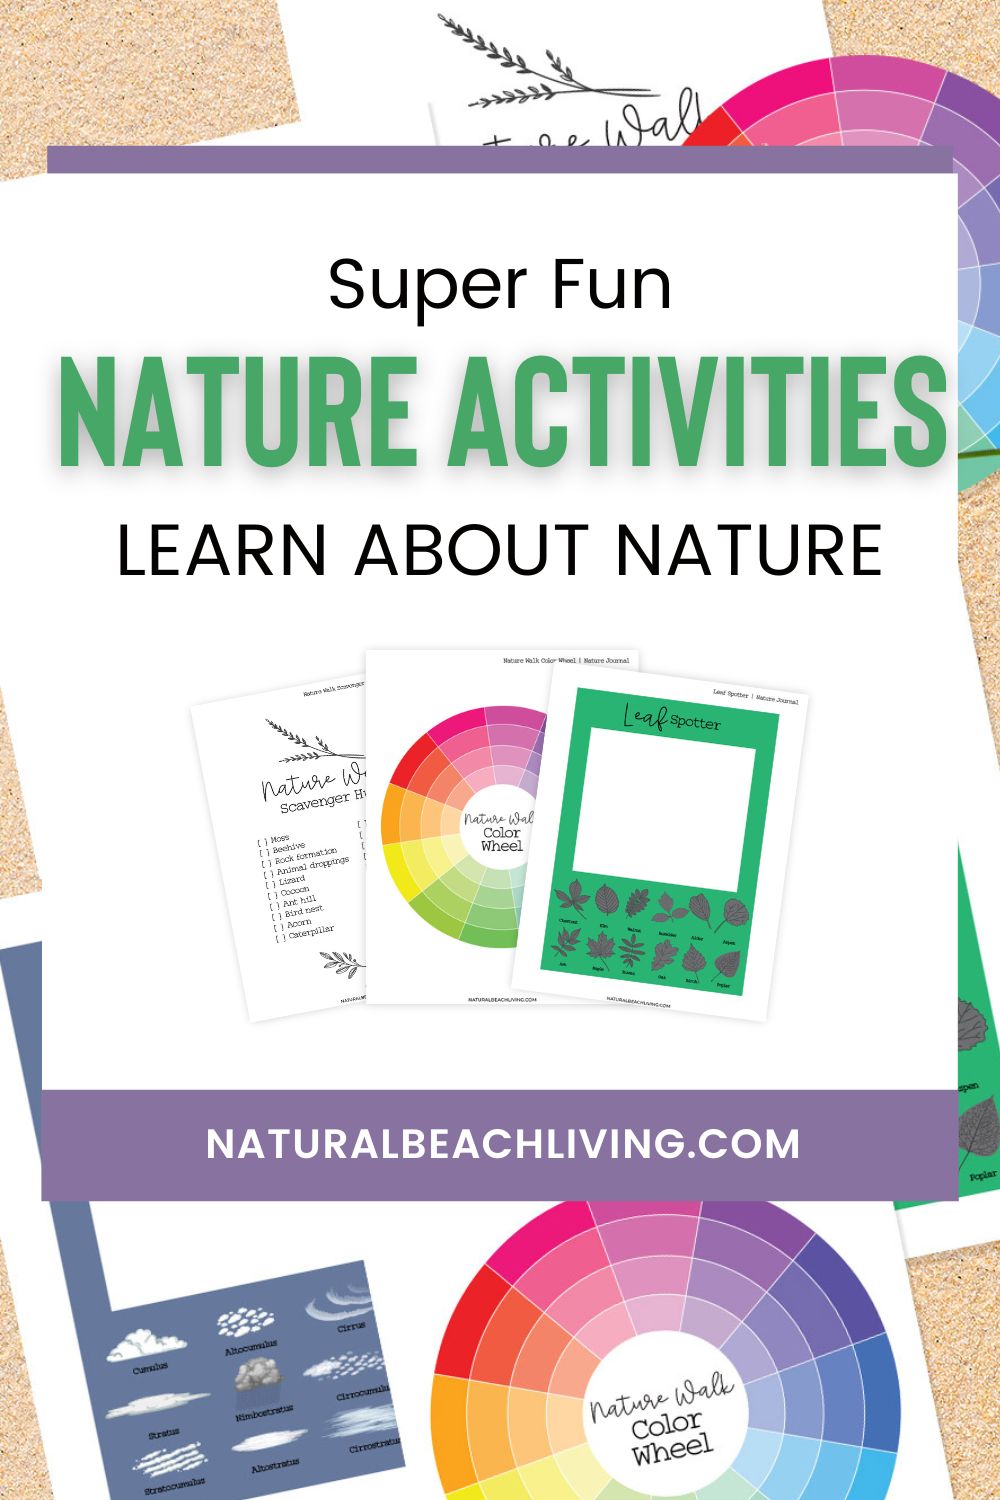 Find The Best Outdoor Nature Activities for children, from Nature Scavenger Hunt, Nature Theme Ideas, The Study of Nature, Nature Camp Activities, Nature walk, Identifying Leaves, Cloud Spotting and so much more. 